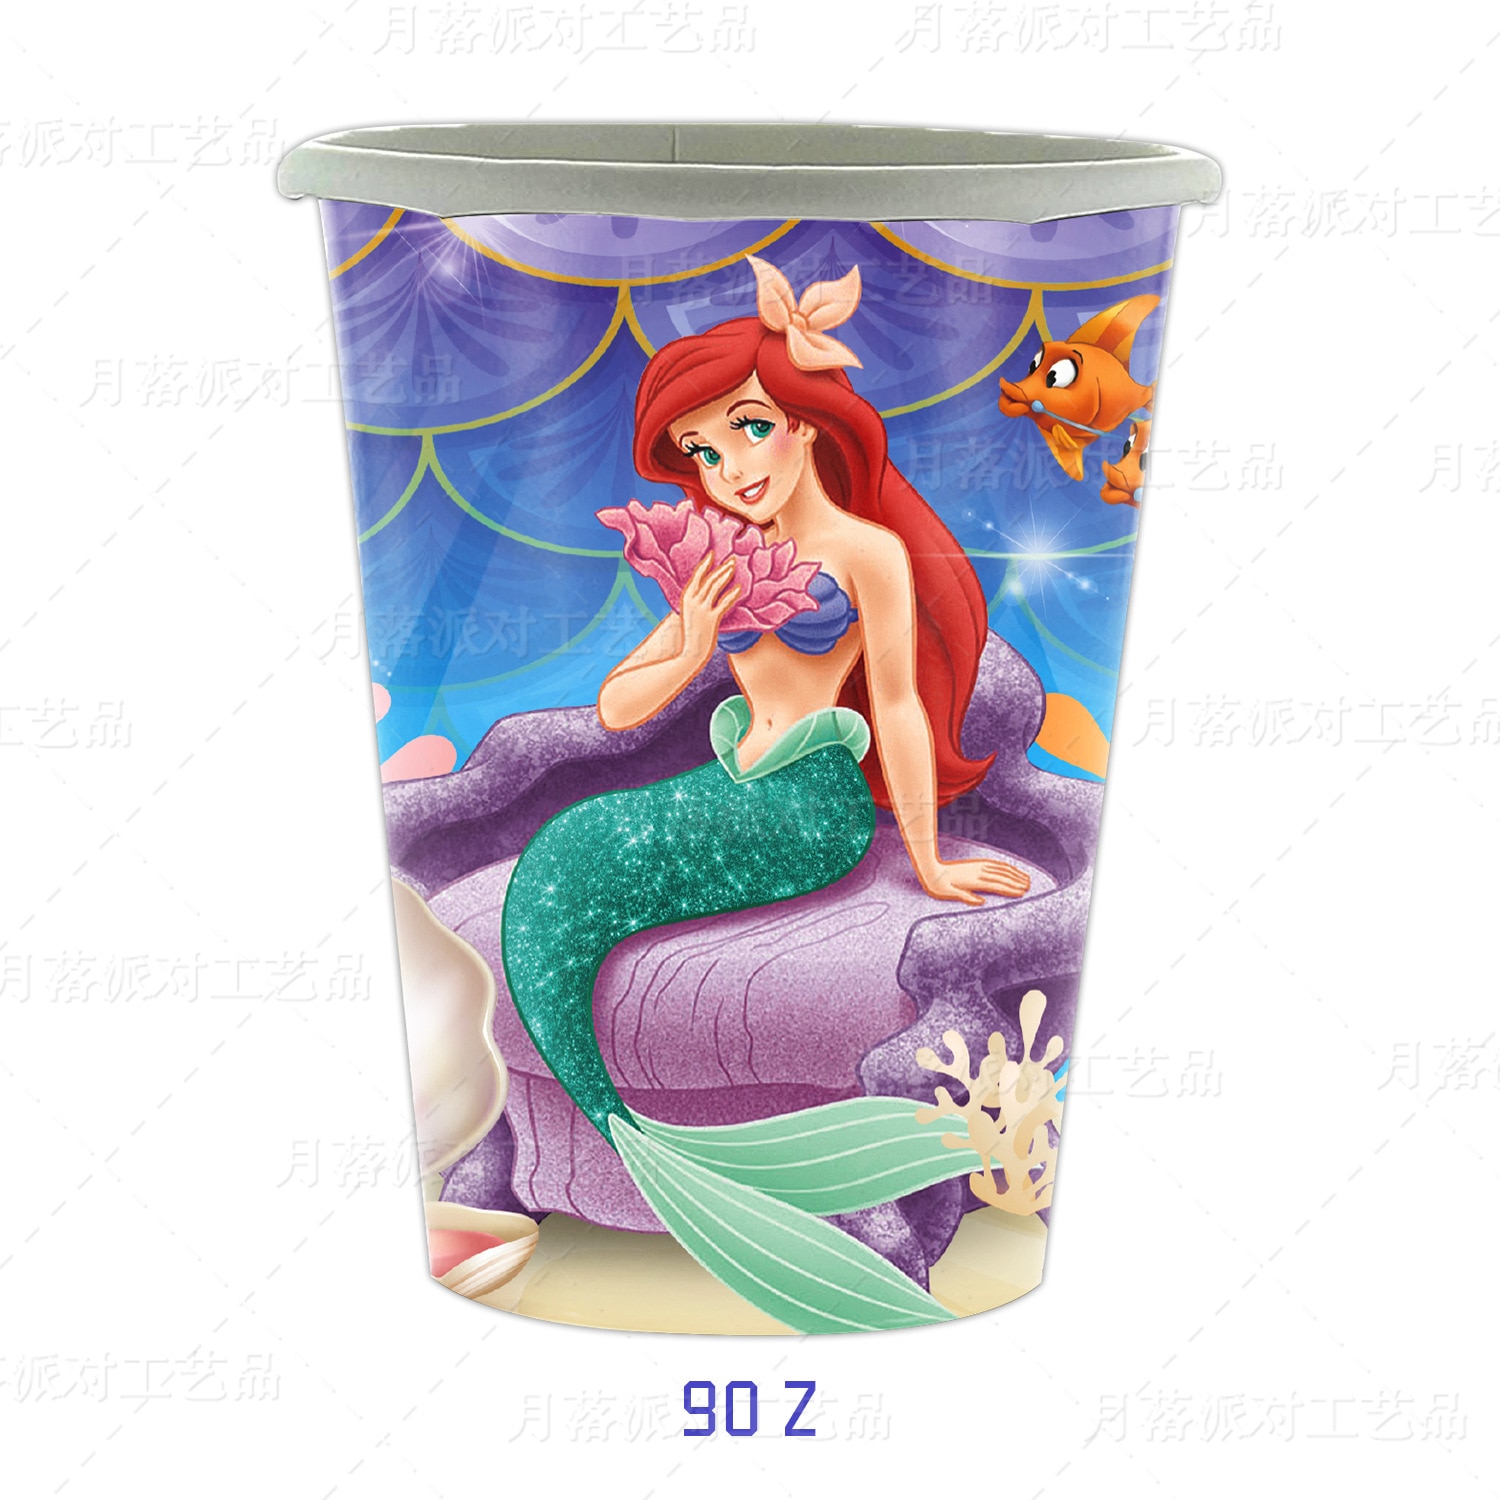 New style Little Mermaid Ariel Theme Girl Birthday Party Paper Plate Napkin Tablecloth Disposable Tableware Kids 5 - Ariel Doll